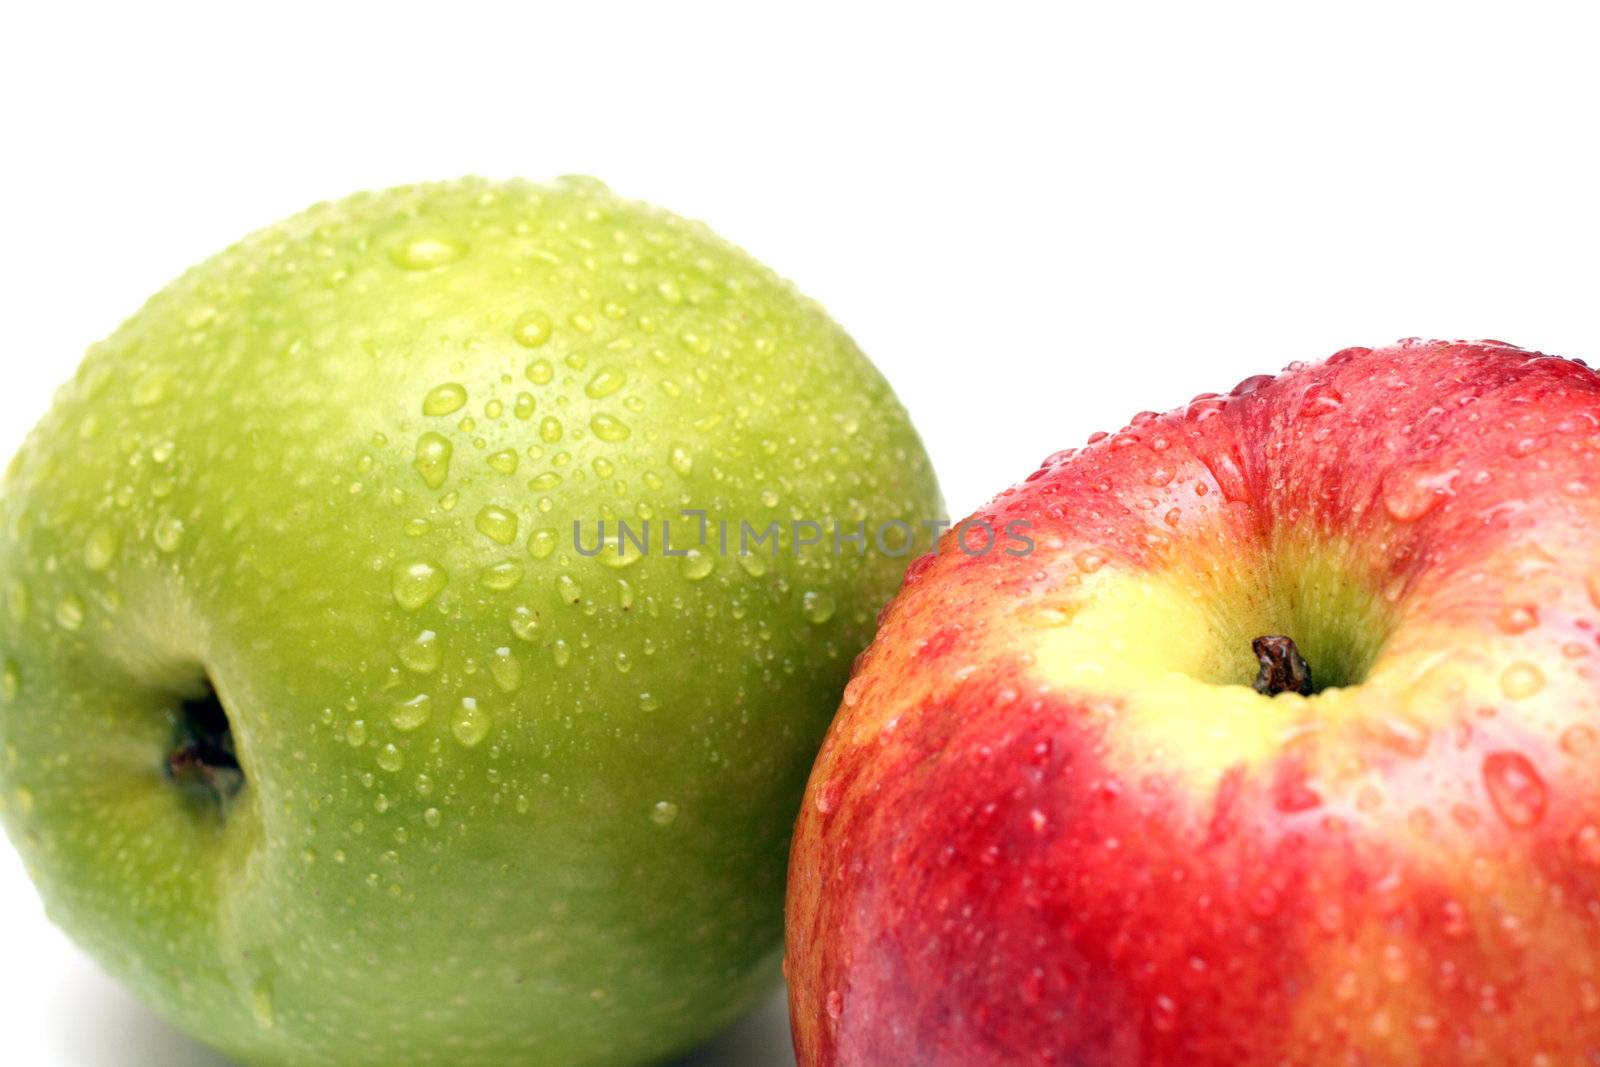 wet green and red apple fruits by Mikko